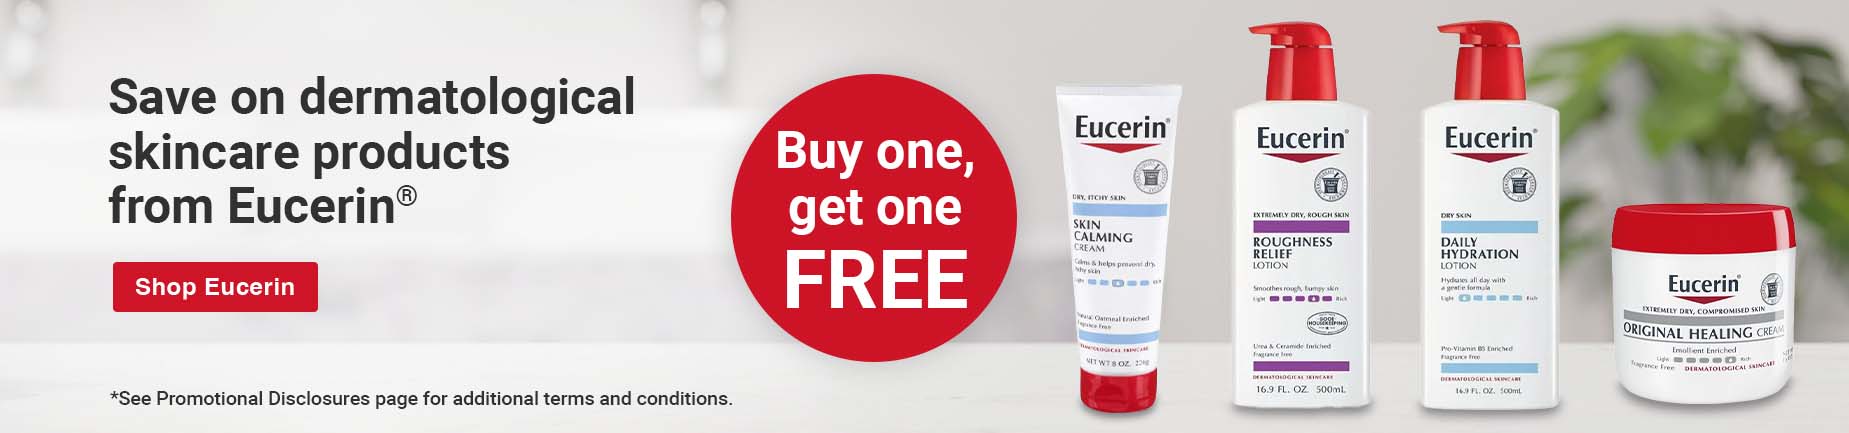 Buy One, Get One Free: All Eucerin skin care products